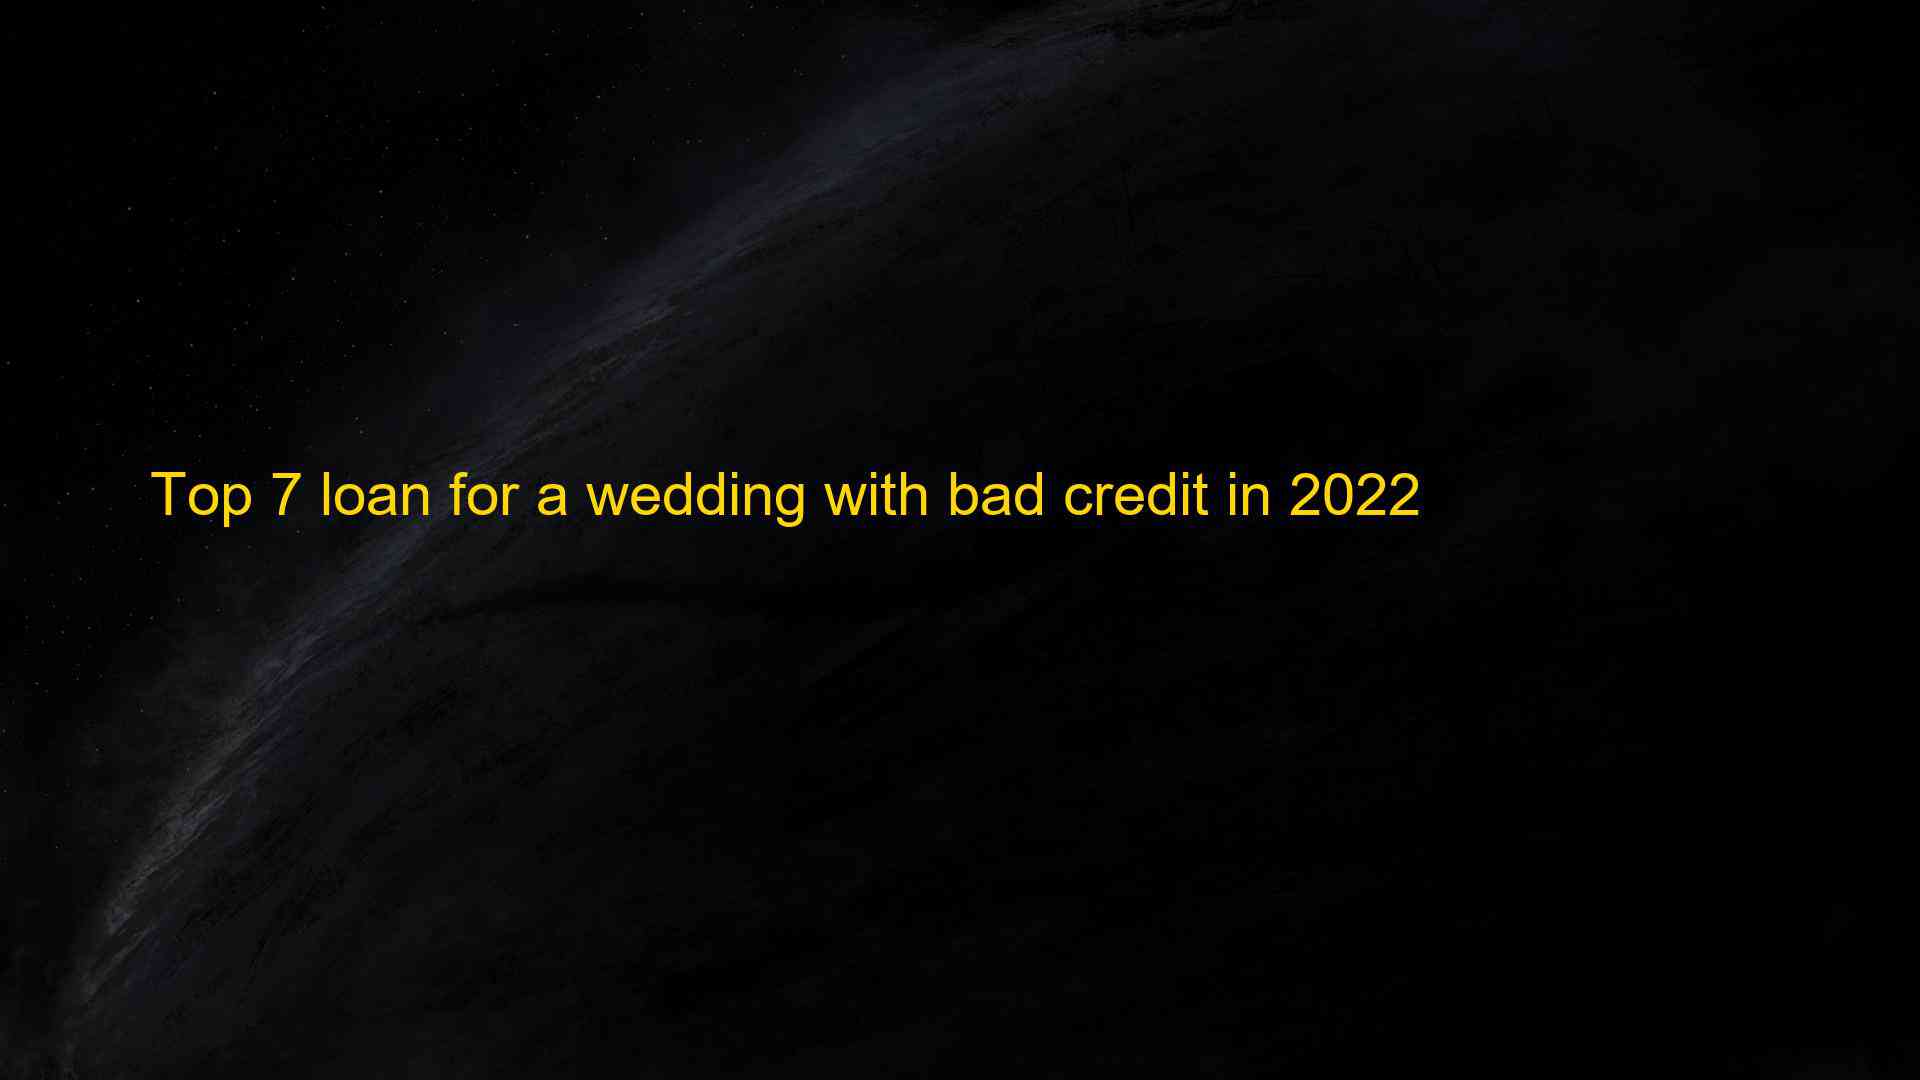 Top 7 loan for a wedding with bad credit in 2022 1660252468